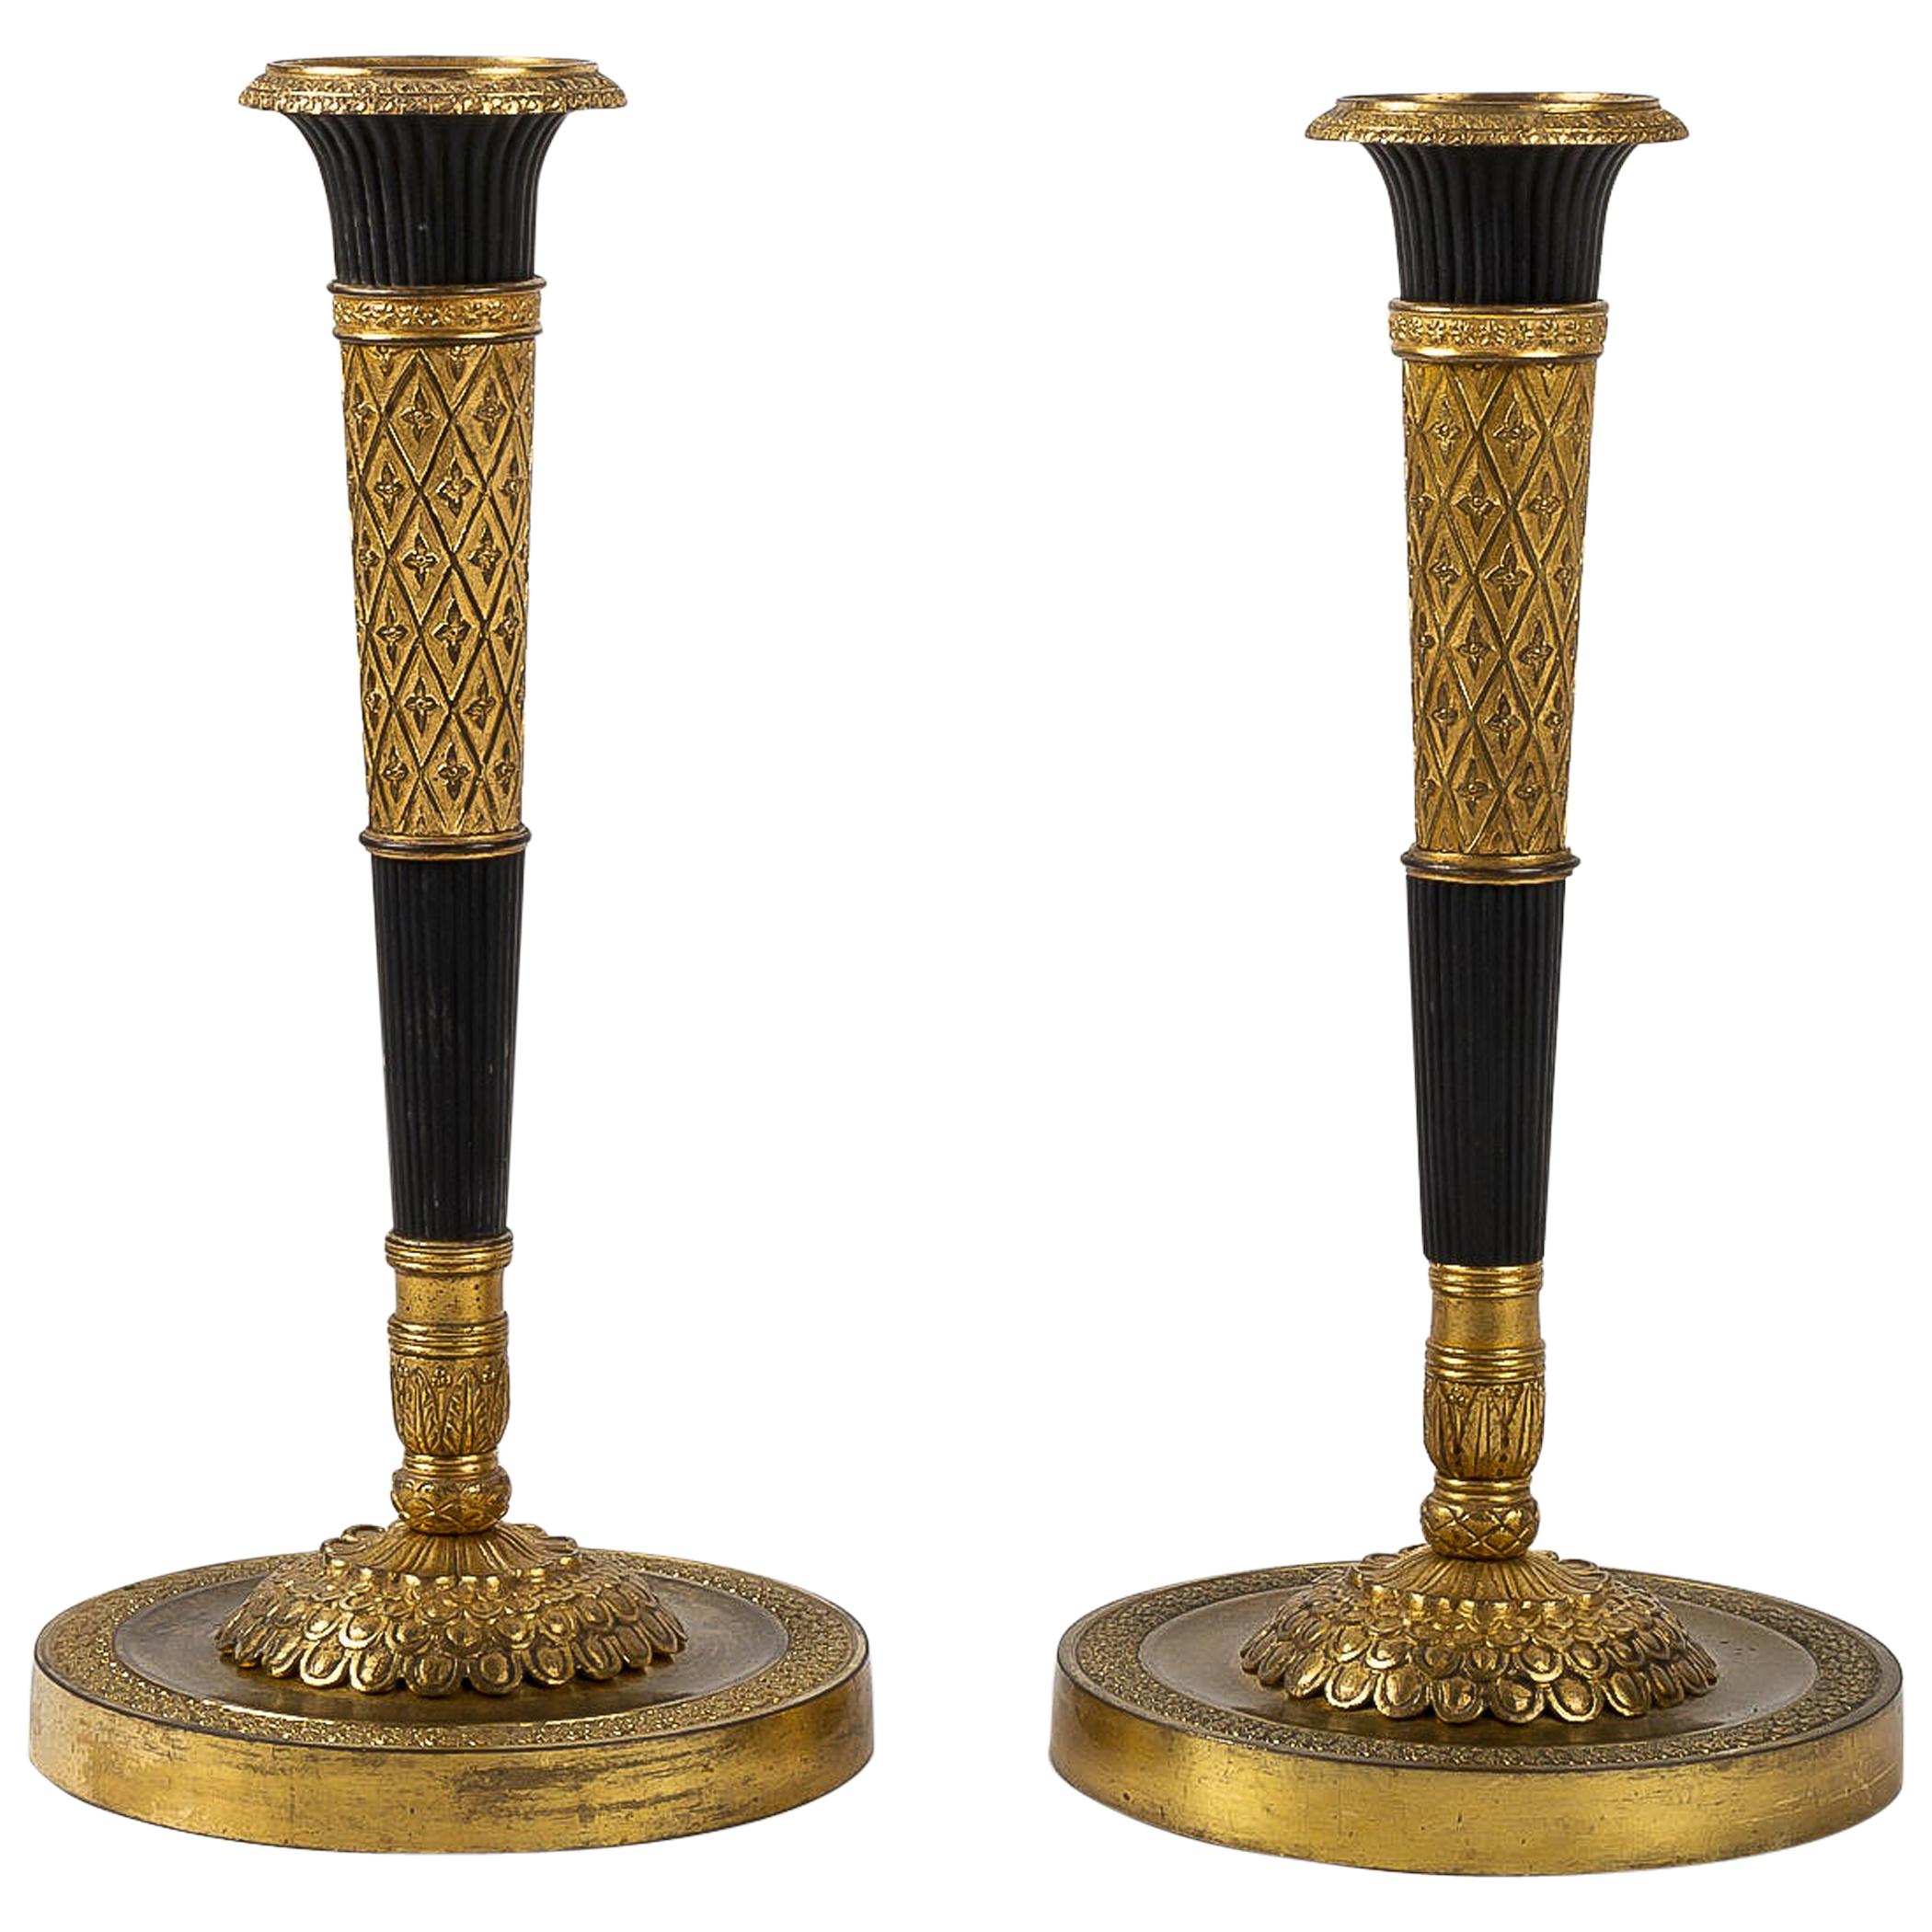 French Directoire Period Pair of French Candlesticks, circa 1798 For Sale